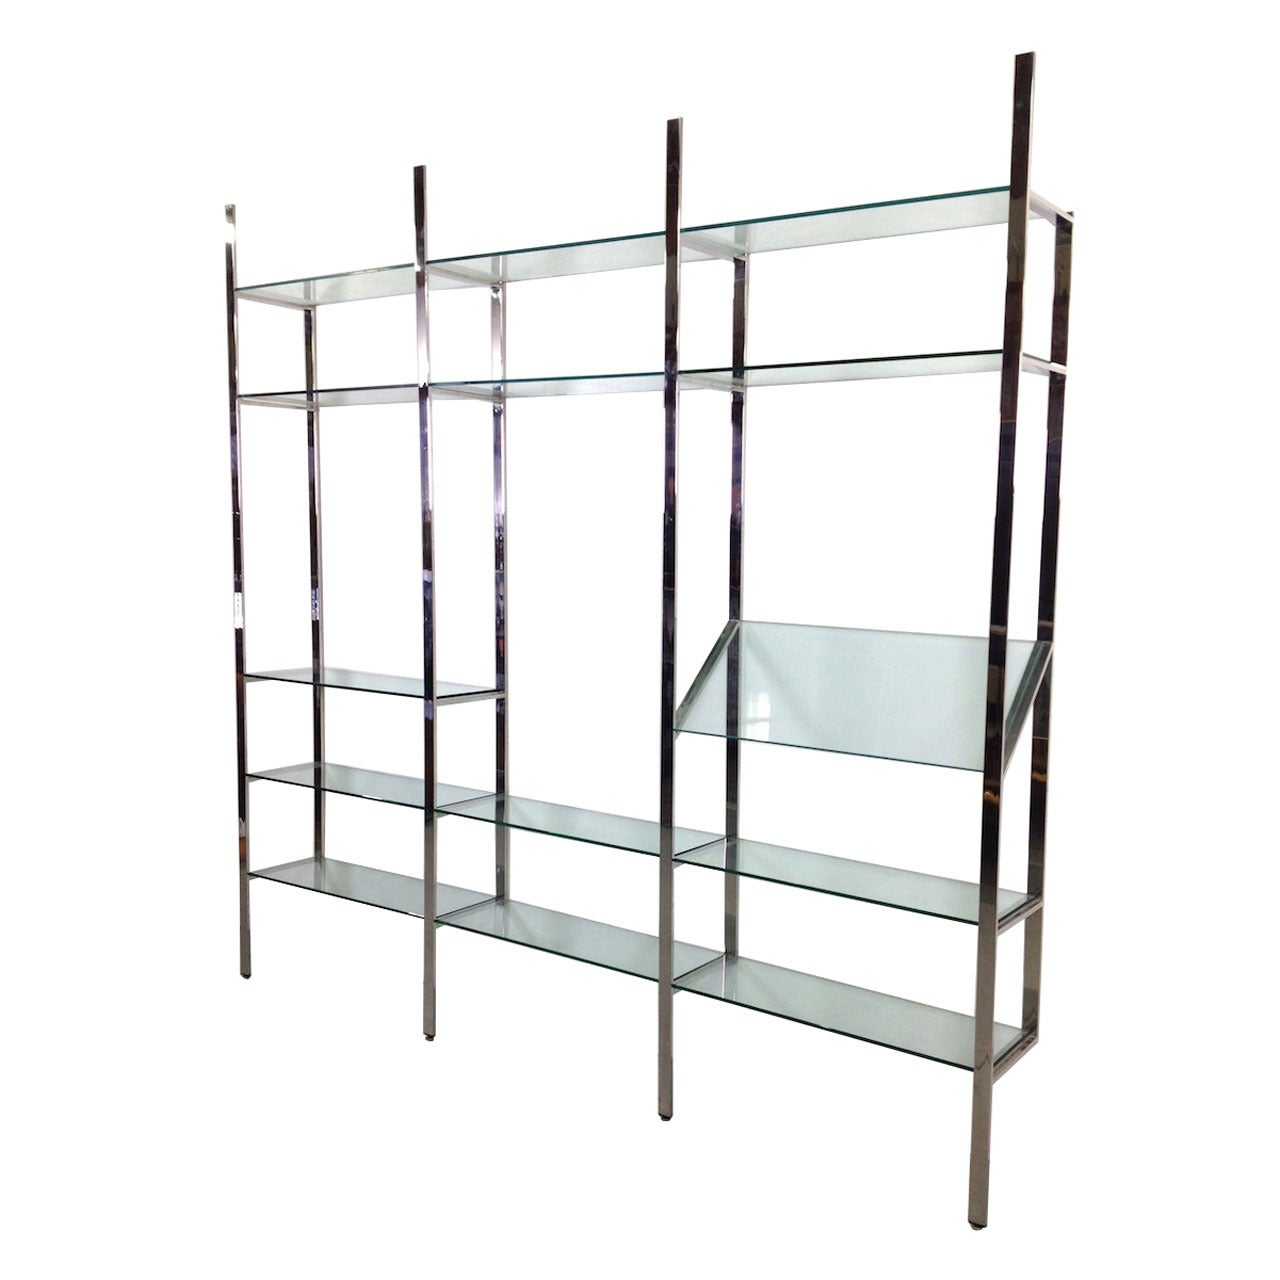 3 Section Flat Bar Chrome and Glass Wall Unit by Milo Baughman for Thayer Coggin